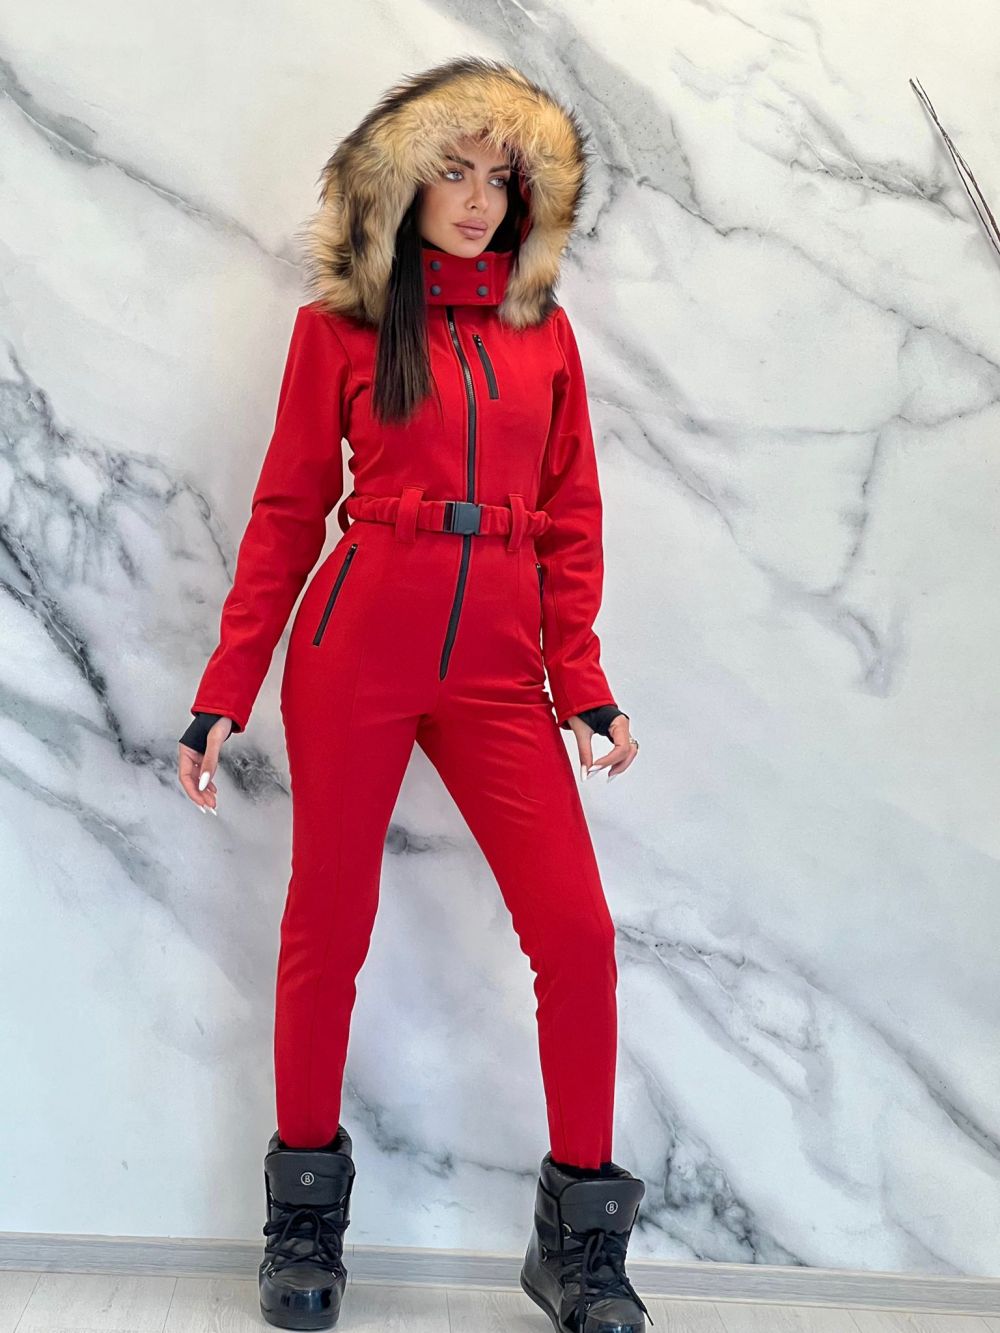 Sydona Bogas casual red ski jumpsuit